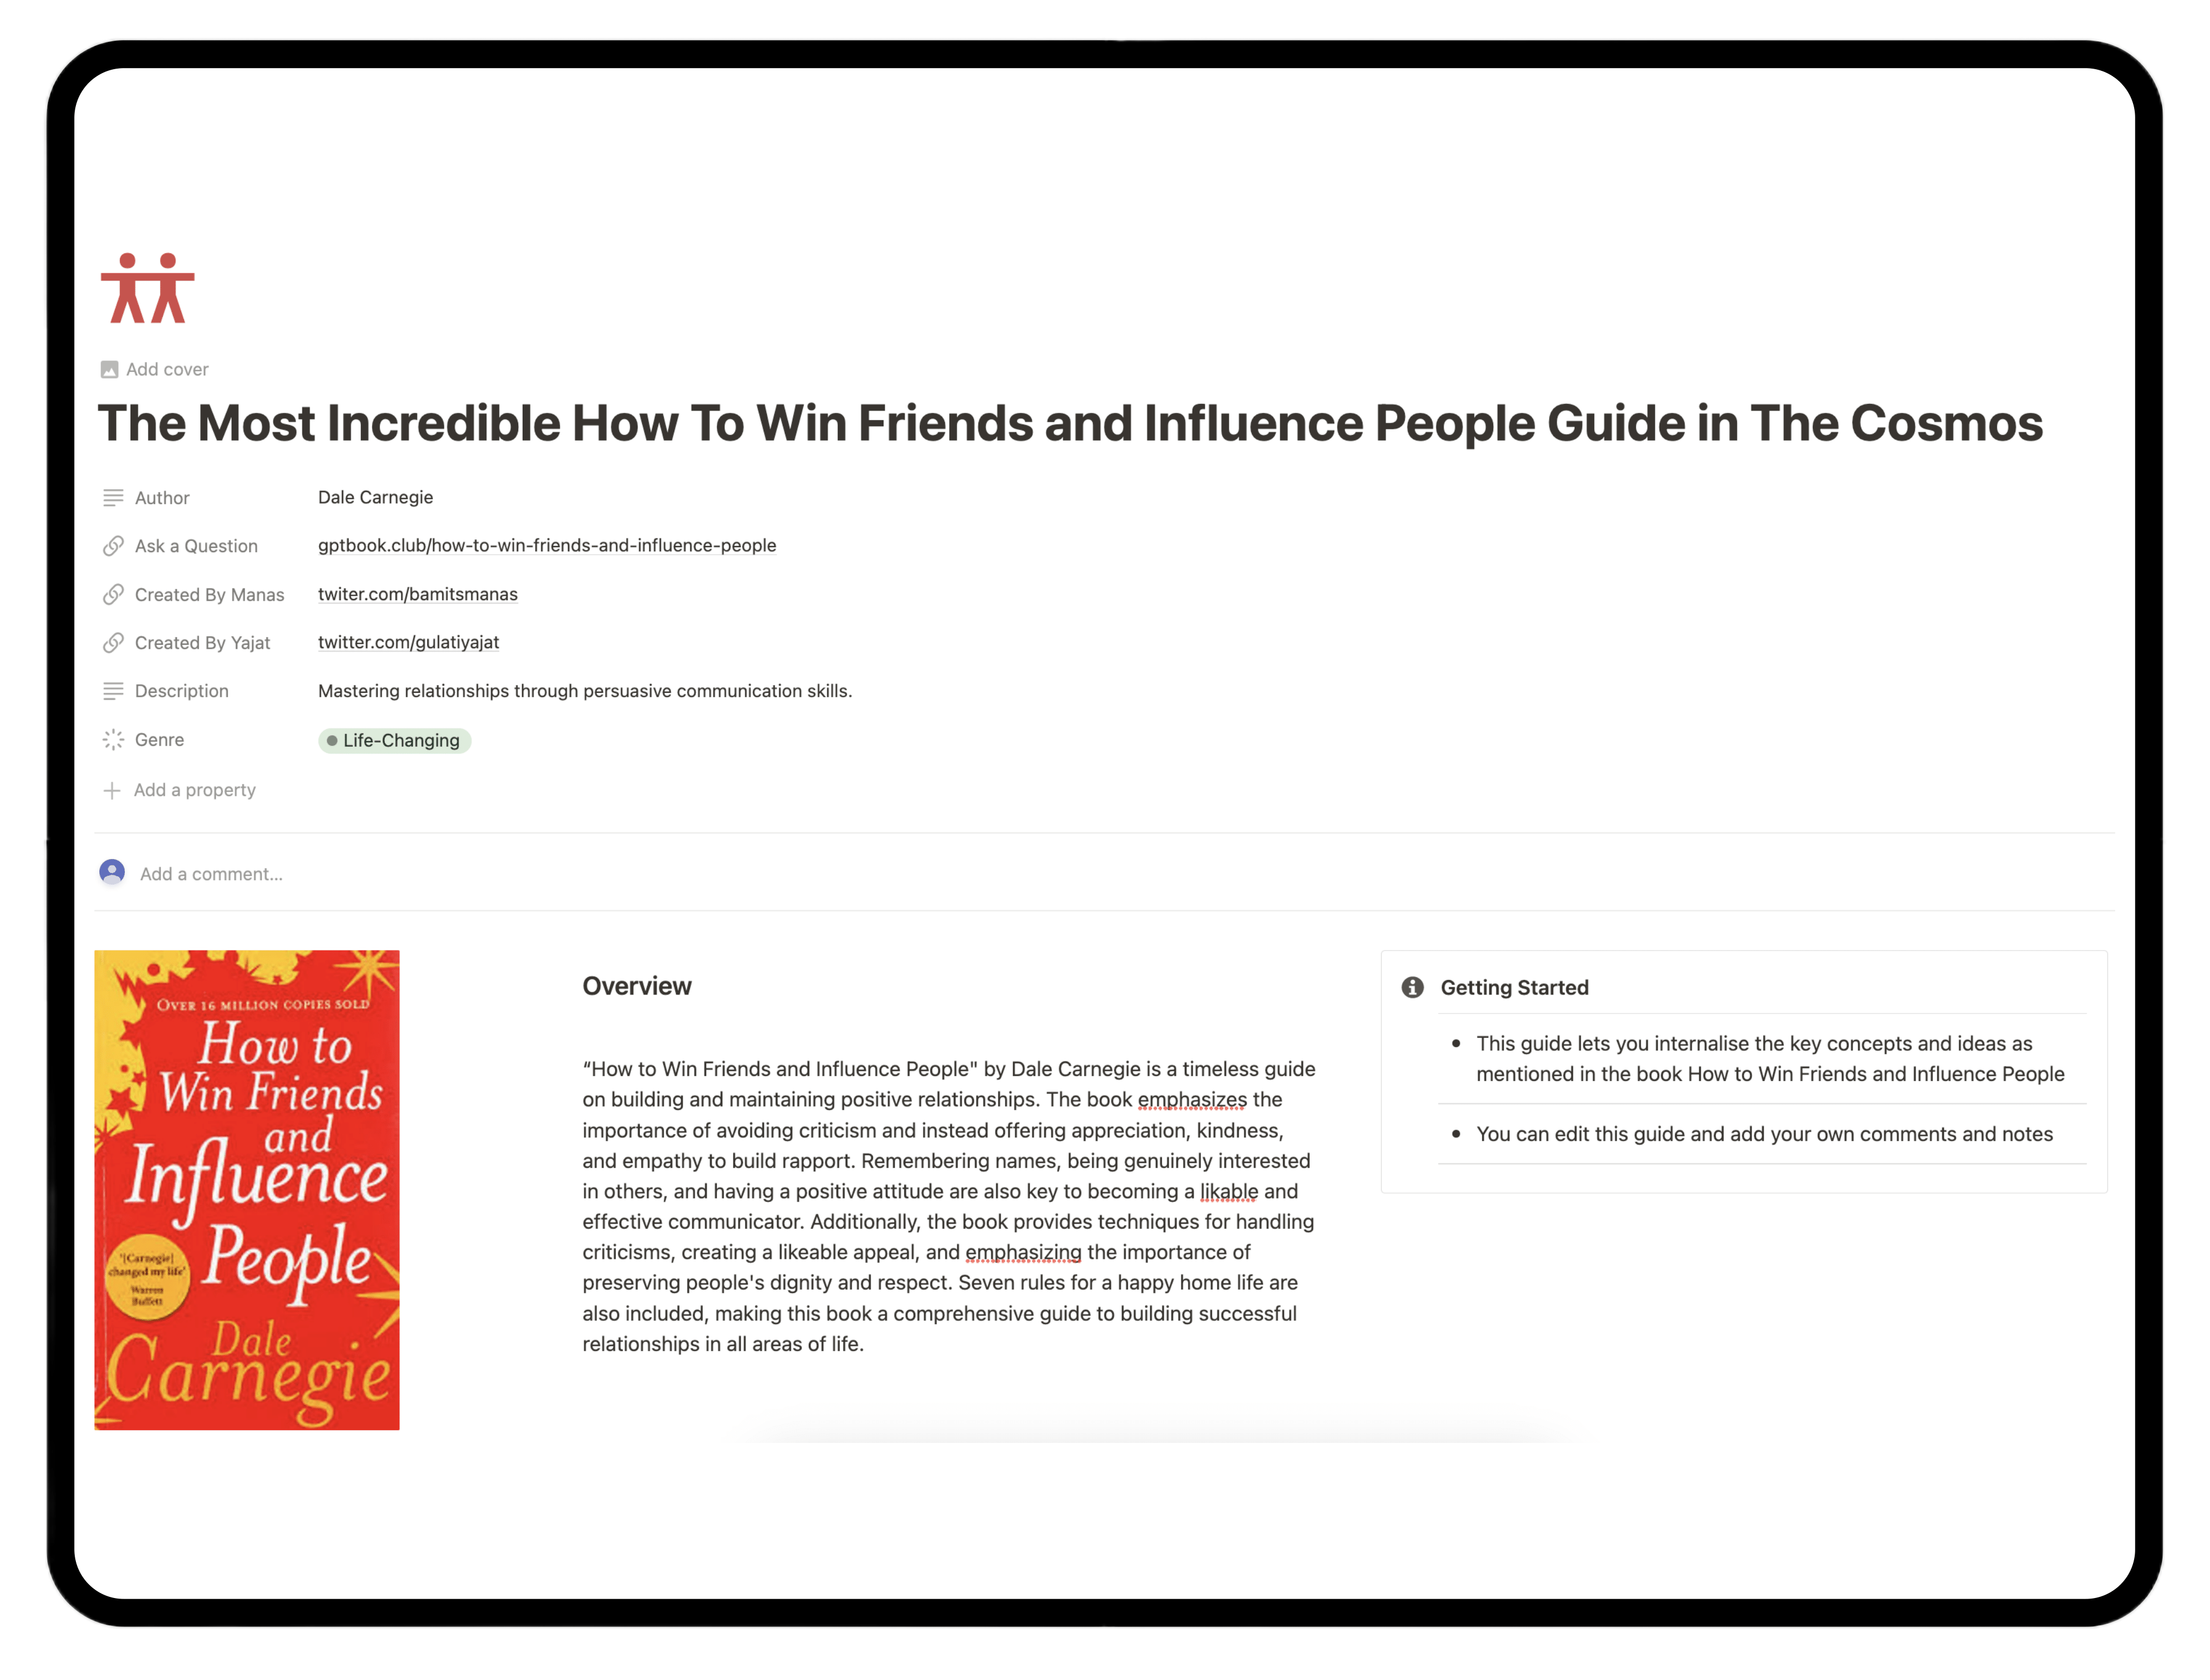 The Most Awesome How To Win Friends And Influence People Guide in the Universe